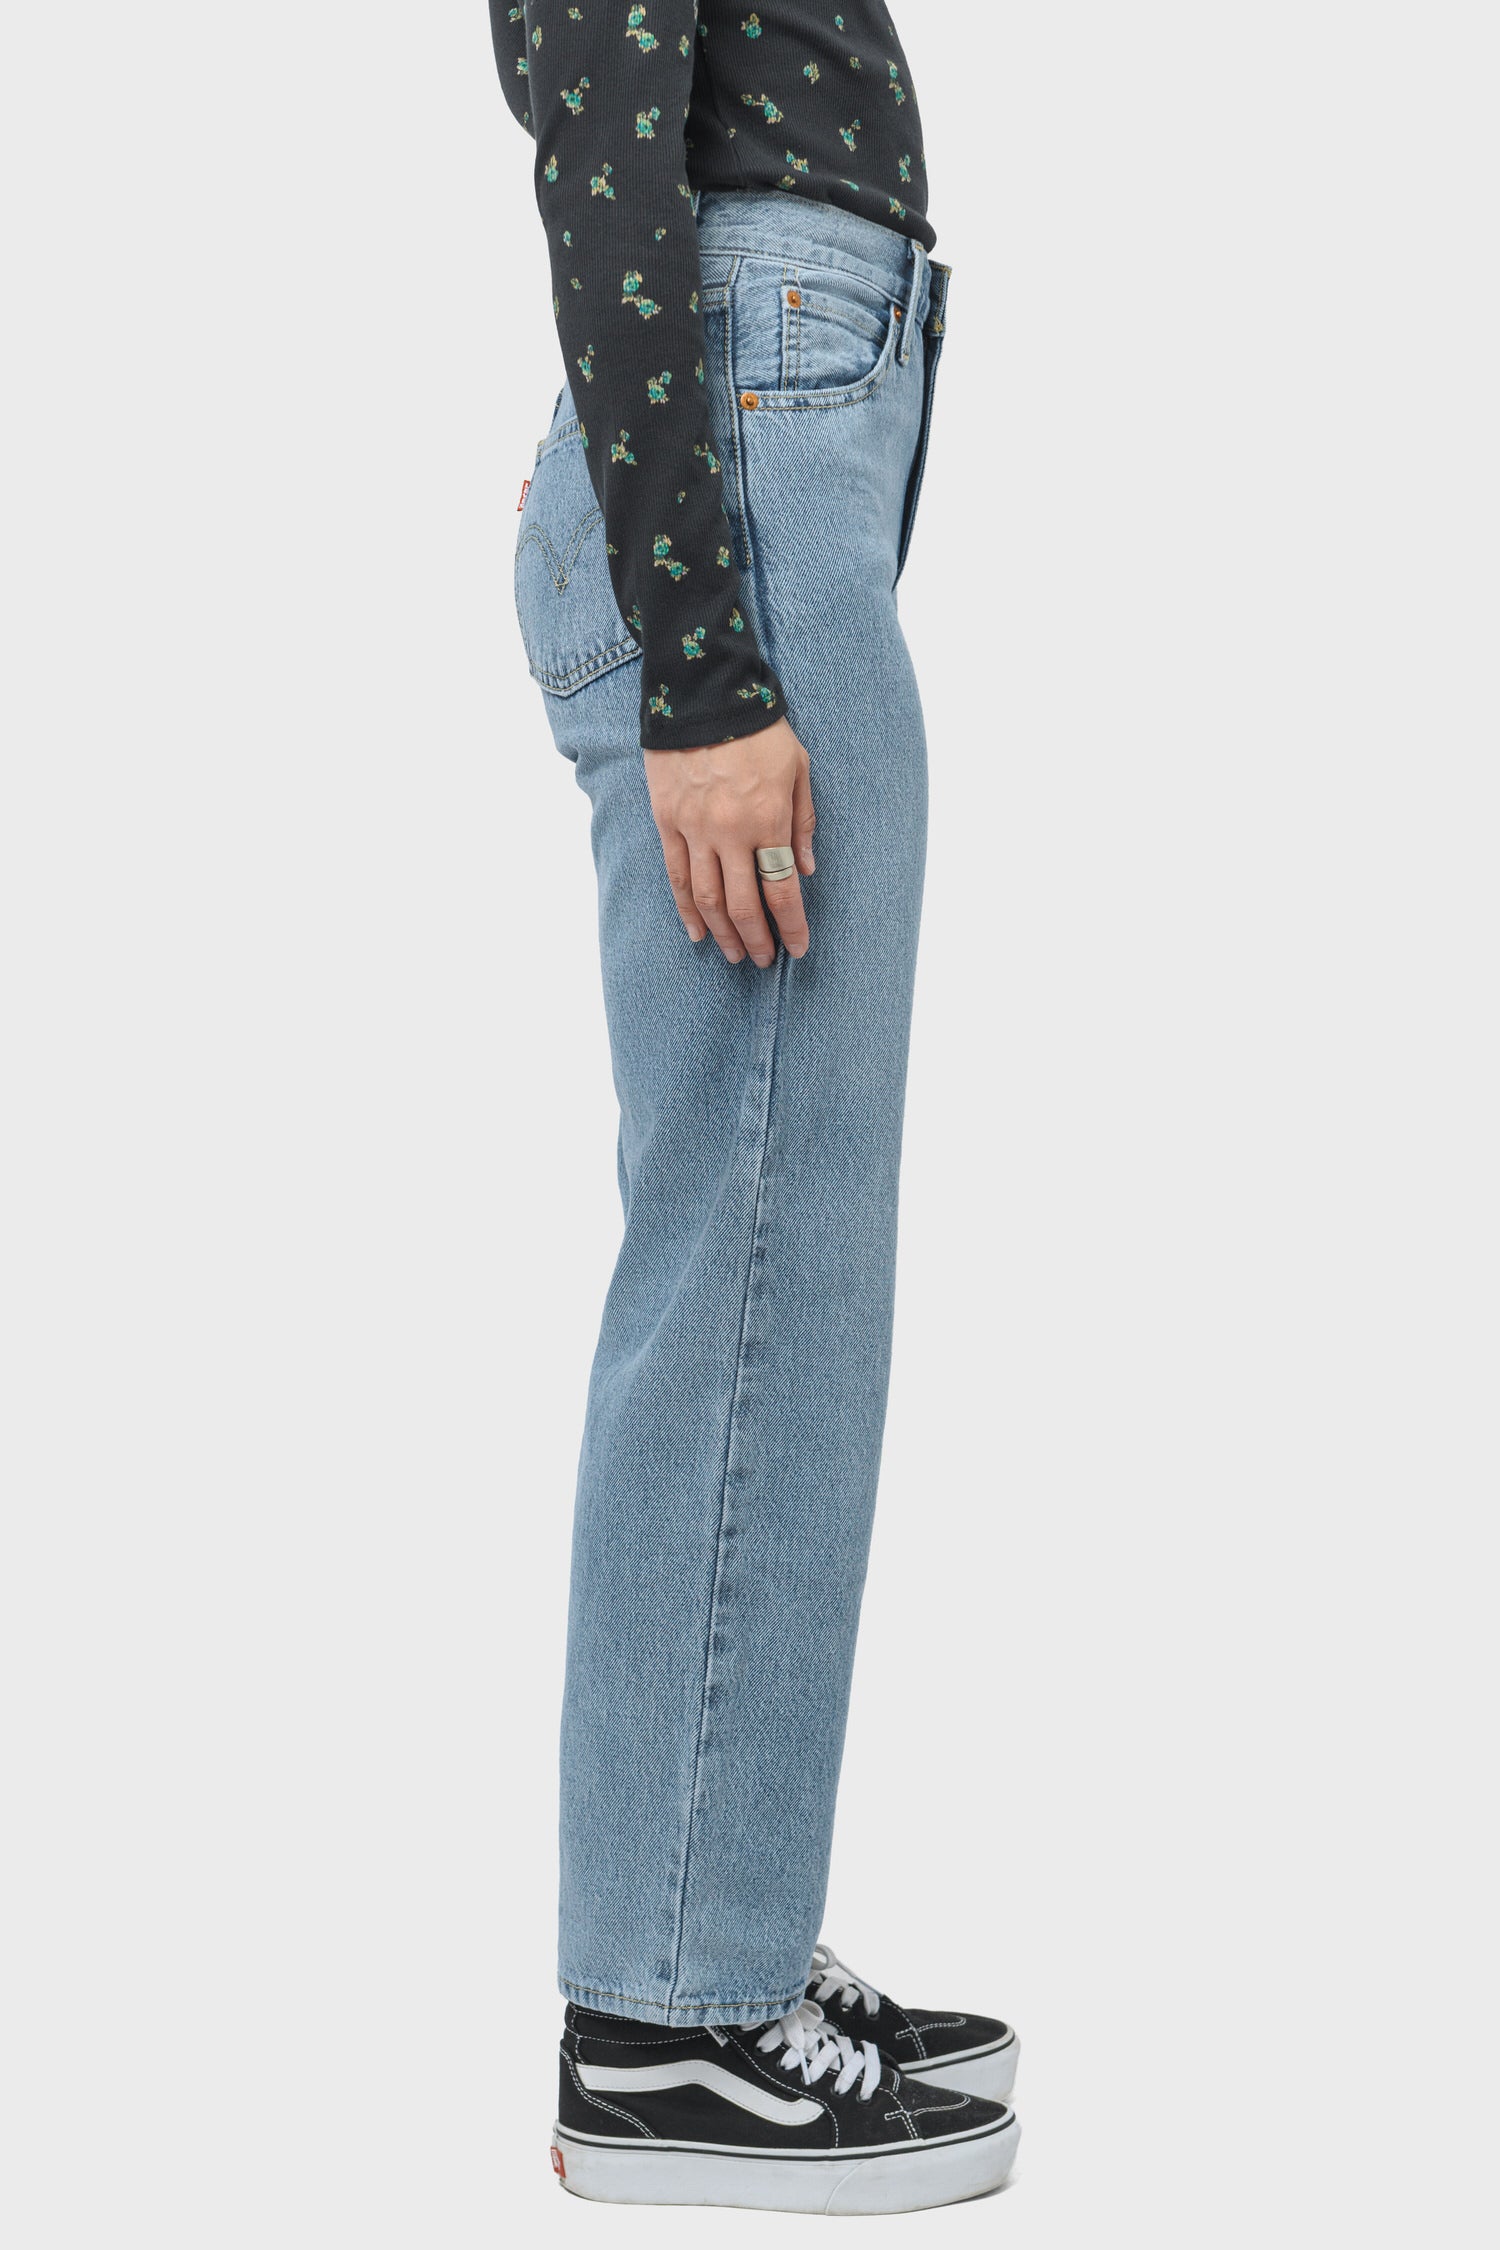 Women's Levi's Dad Jean in Far and Wide